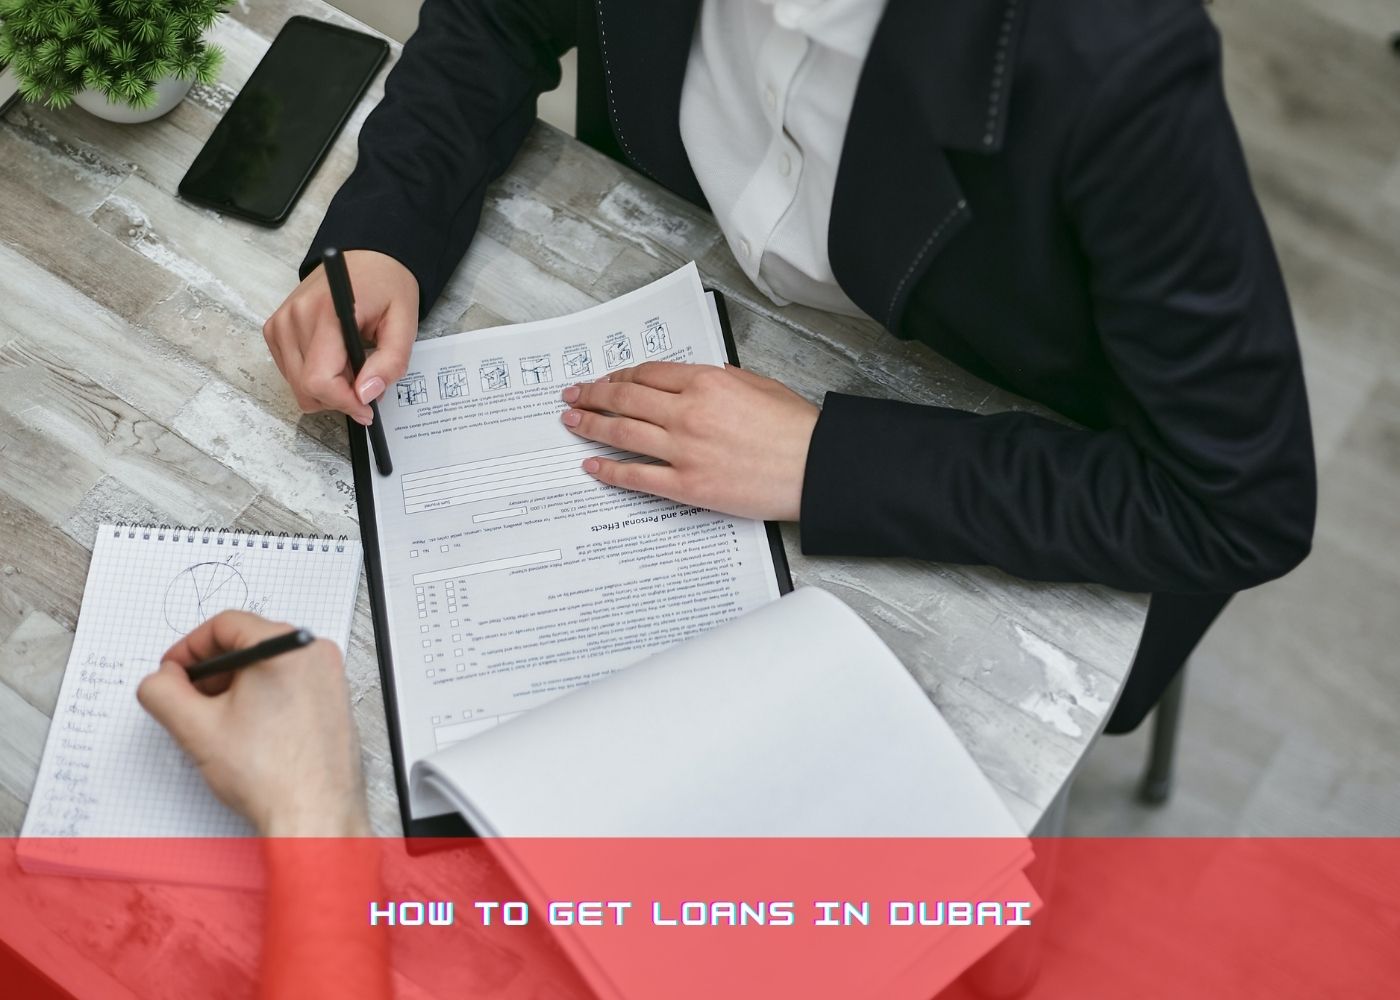 How to get loans in Dubai